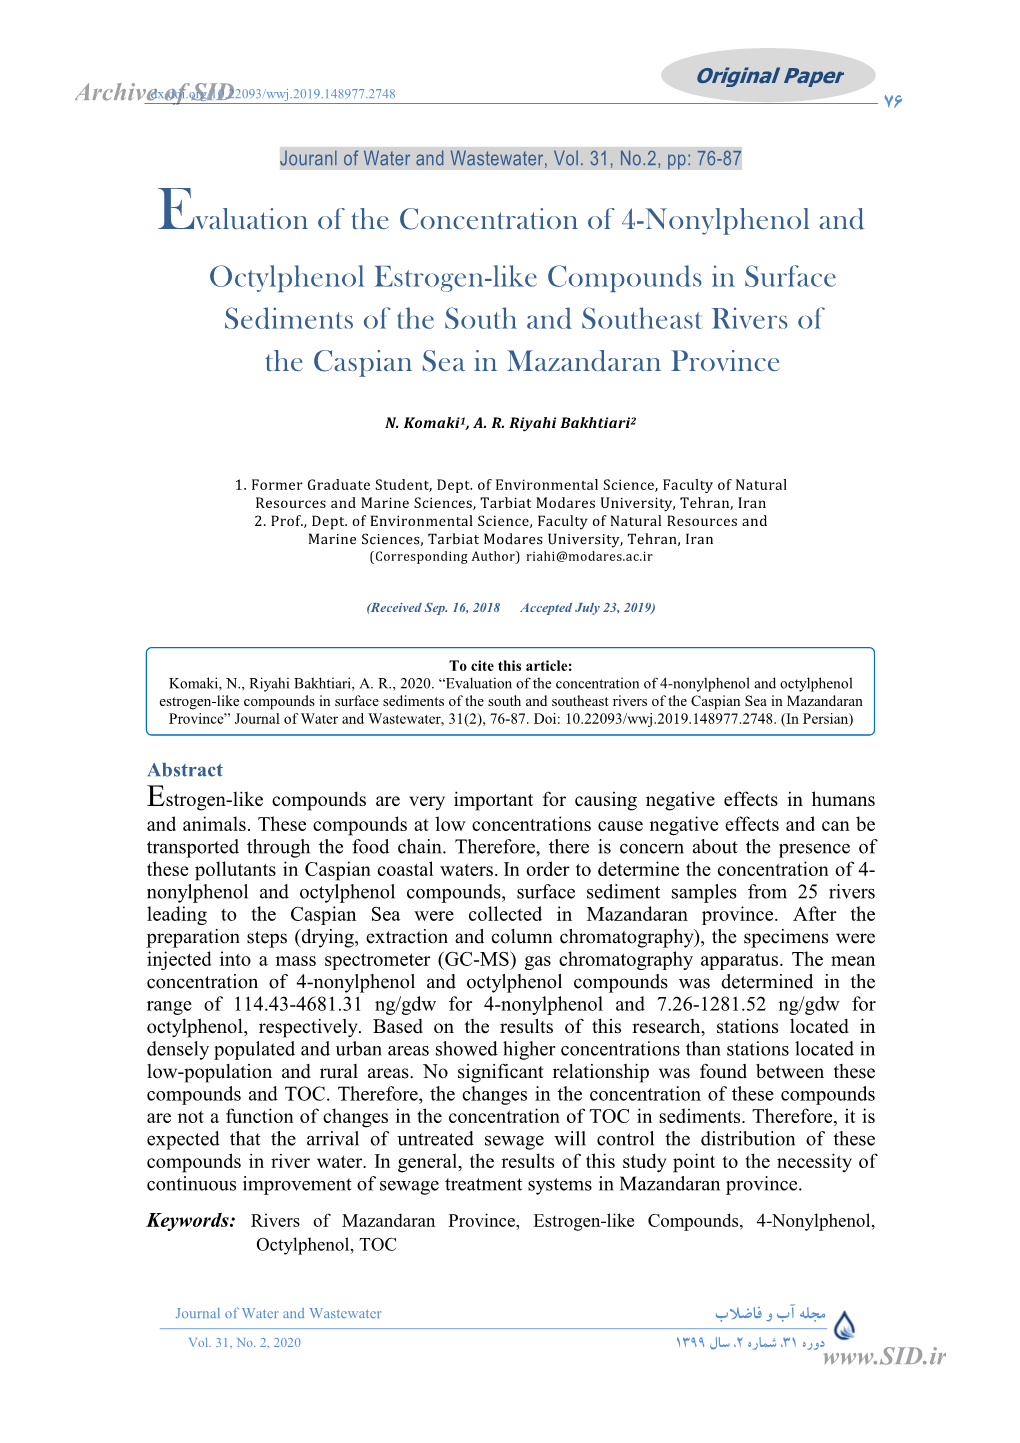 Evaluation of the Concentration of 4-Nonylphenol and Octylphenol